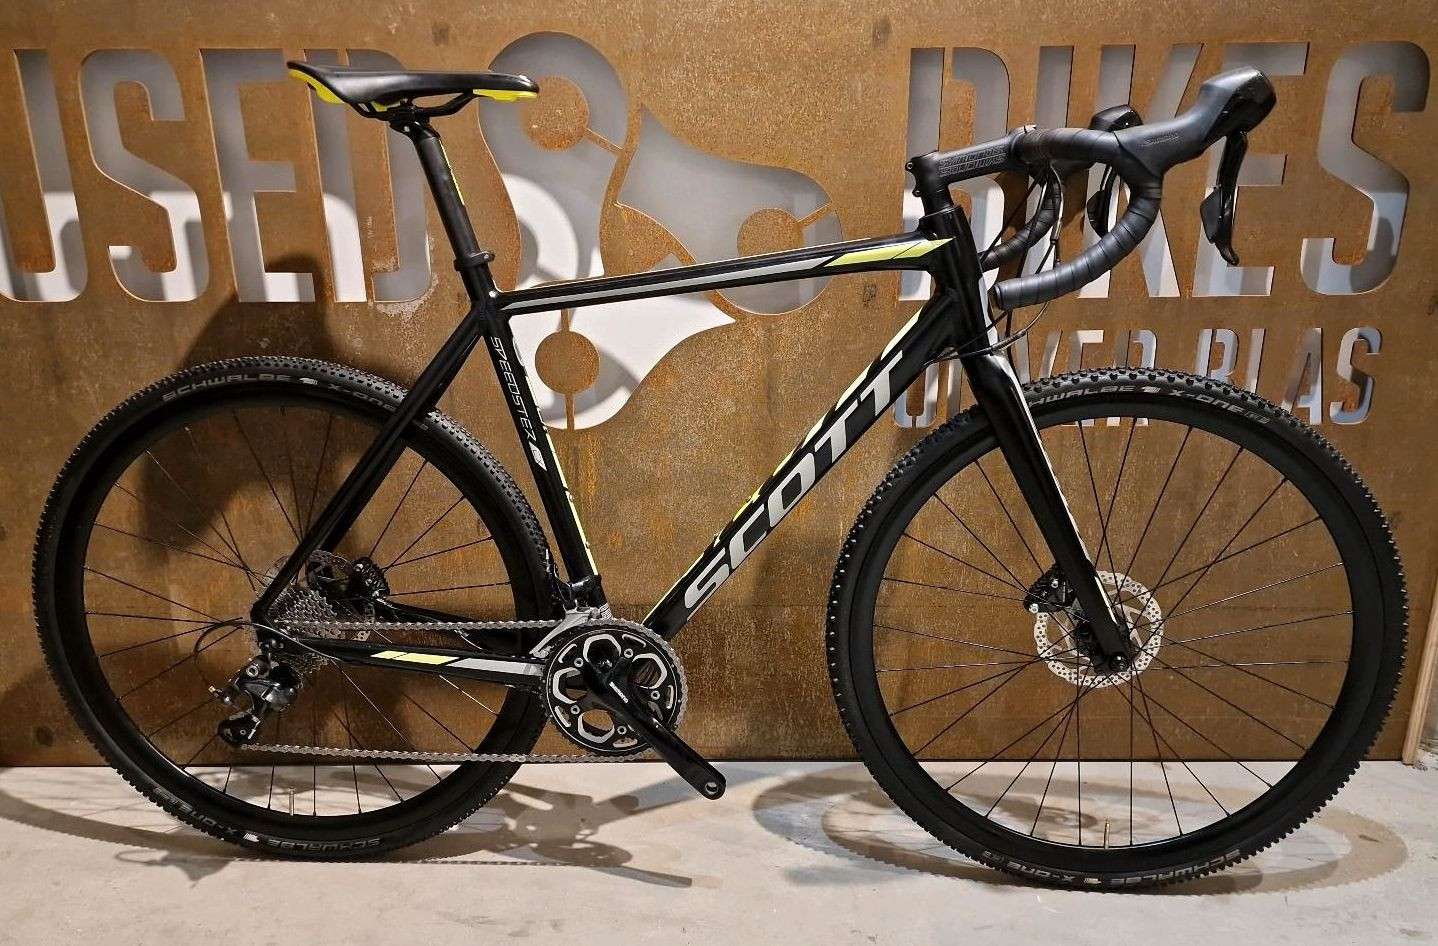 Scott Speedster CX 10 Disc used in LG | buycycle